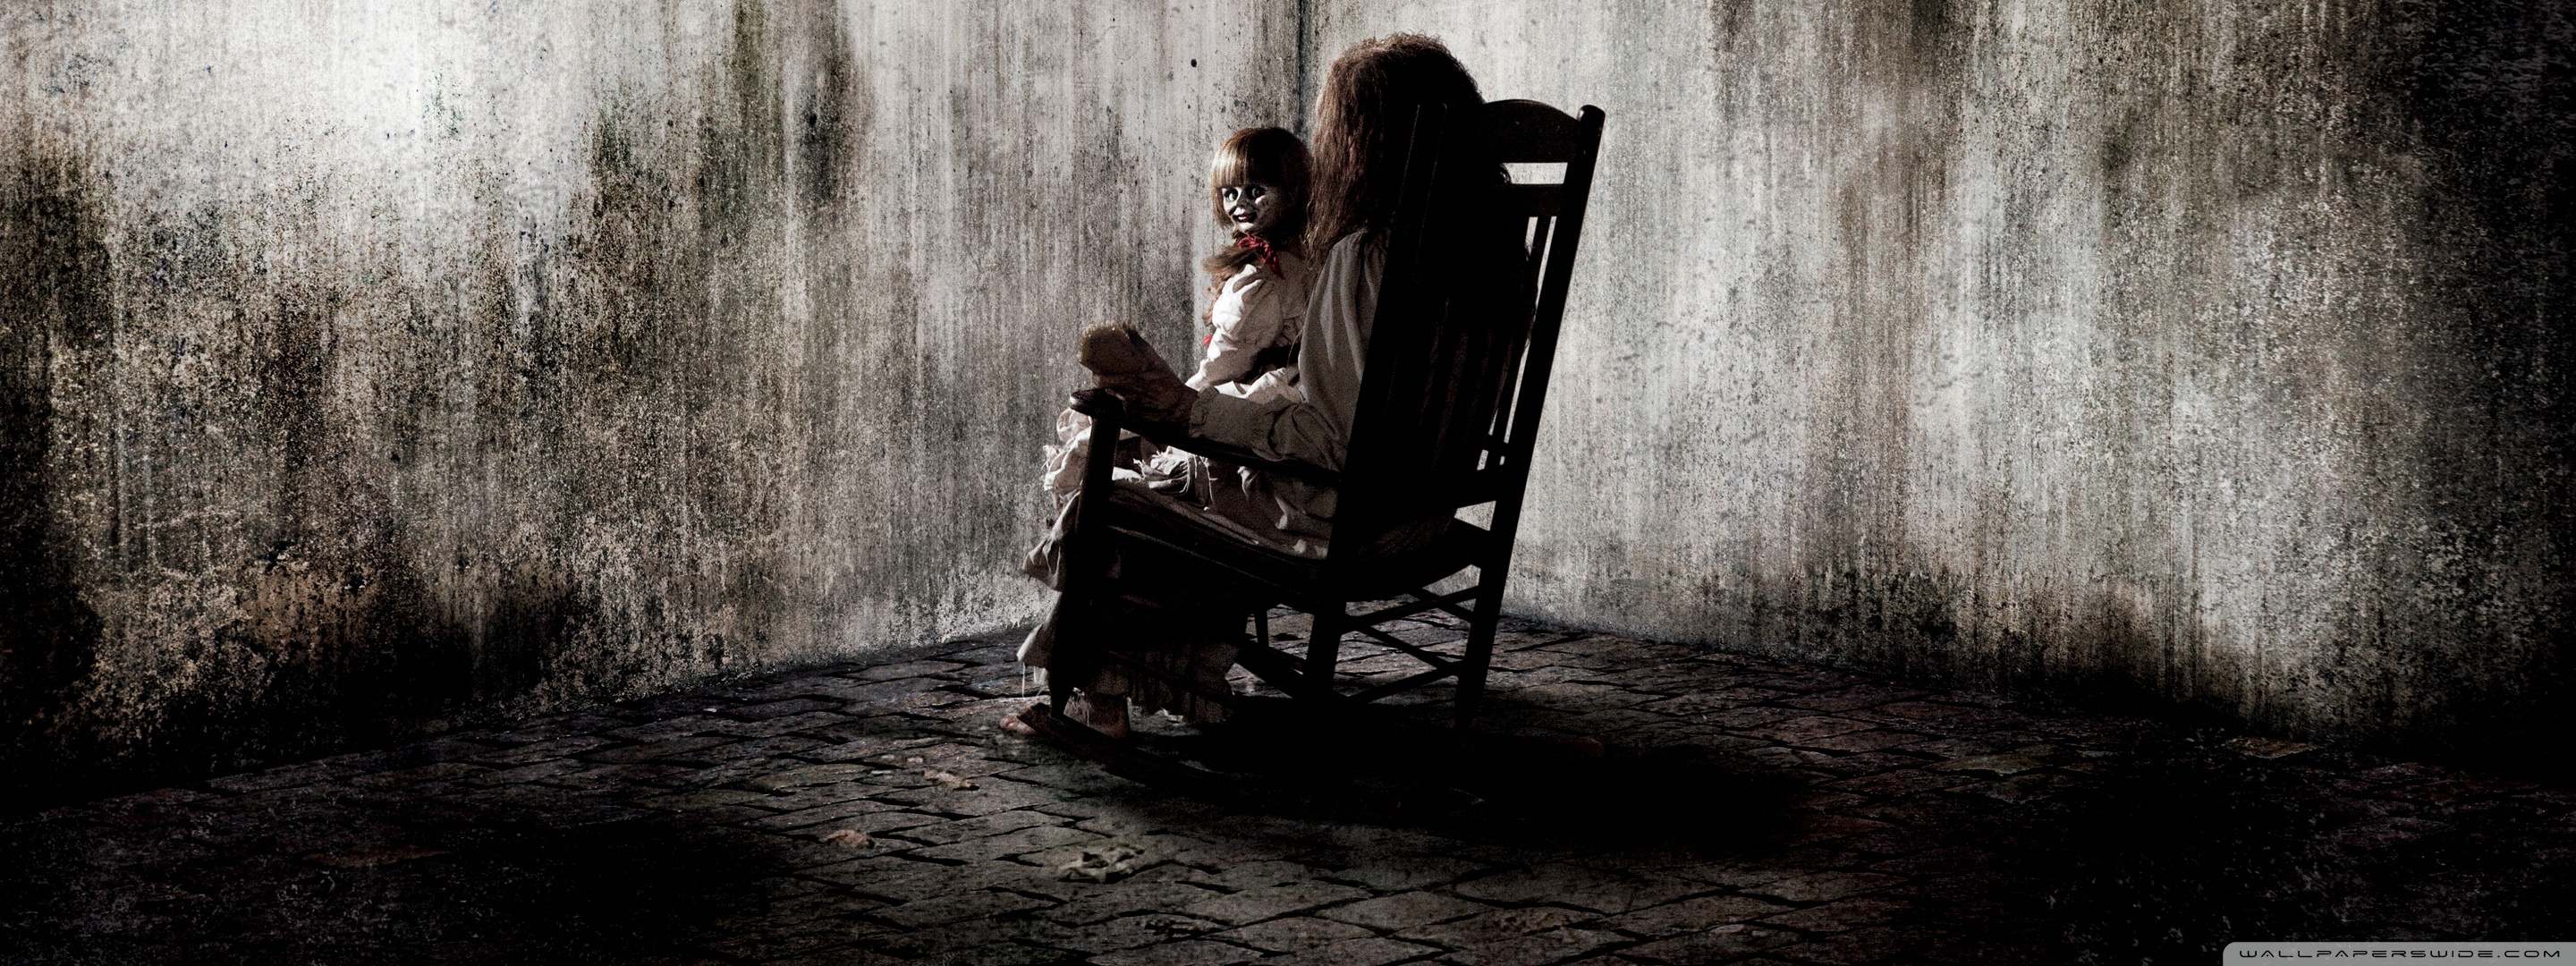 The Conjuring 3 Wallpapers